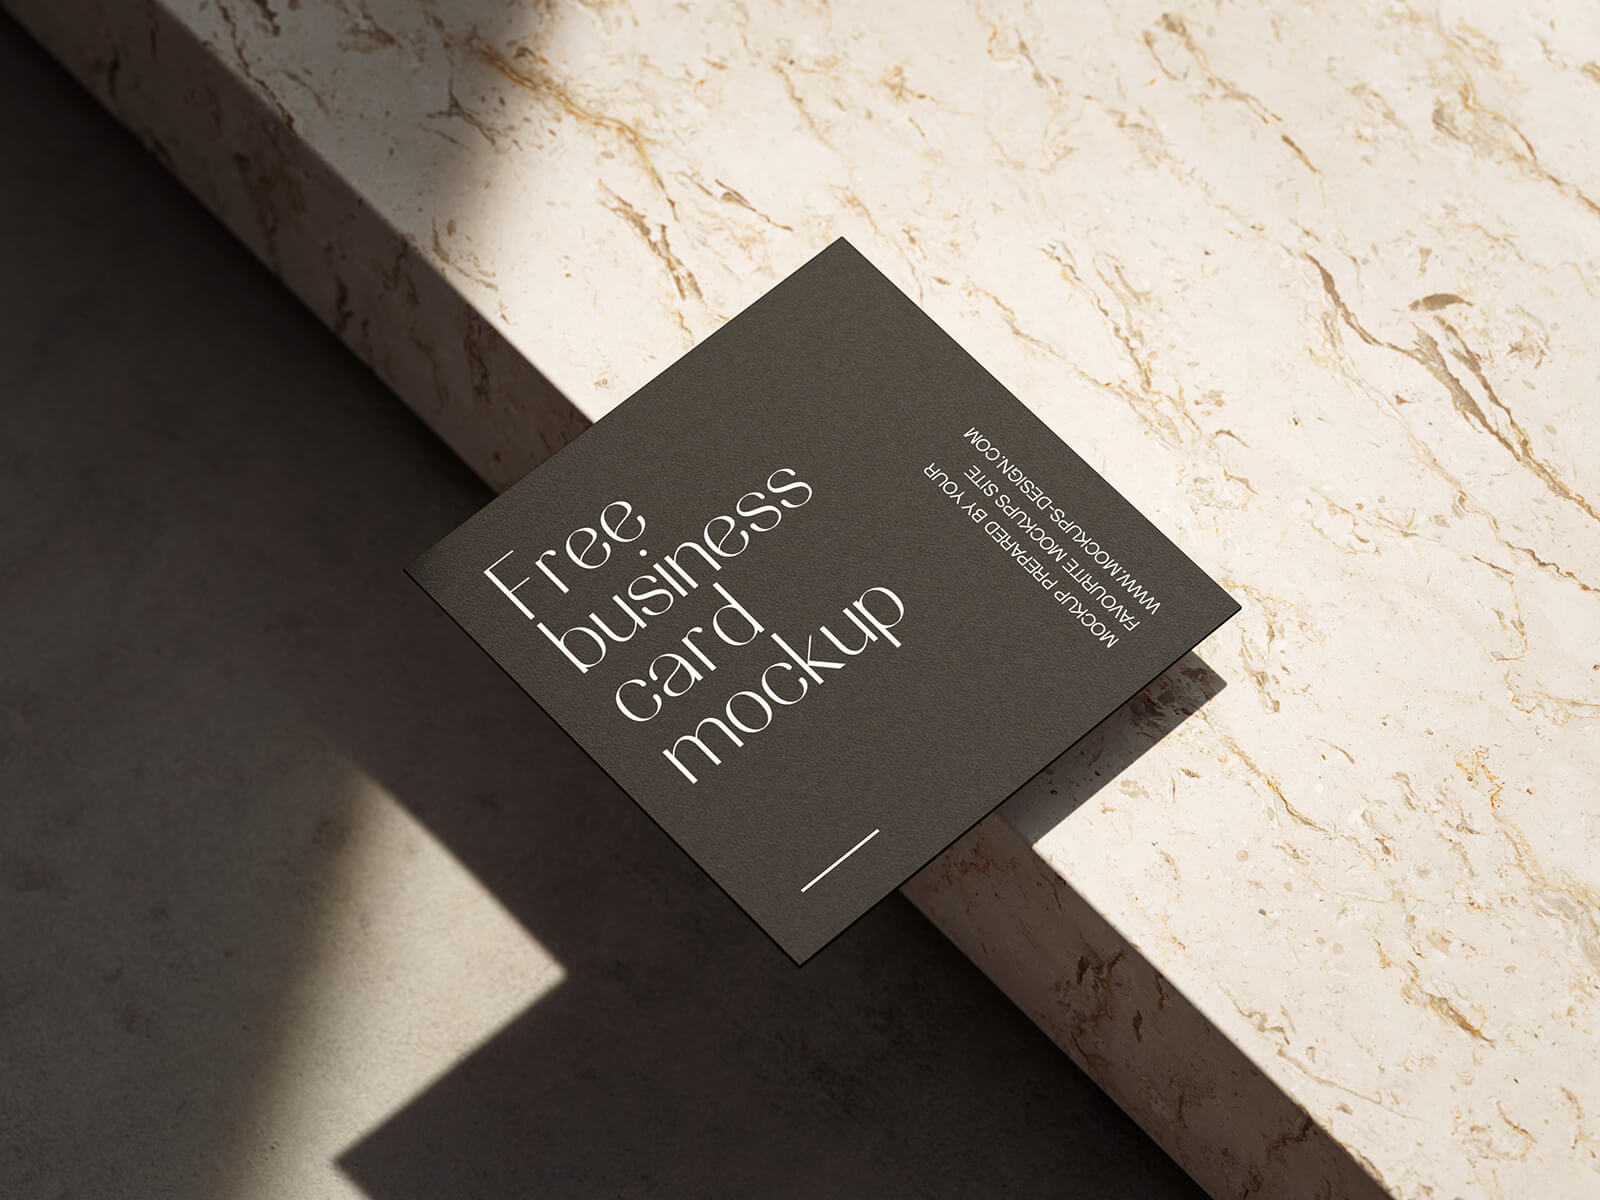 Free Shadow Square Business Card Mockup PSD